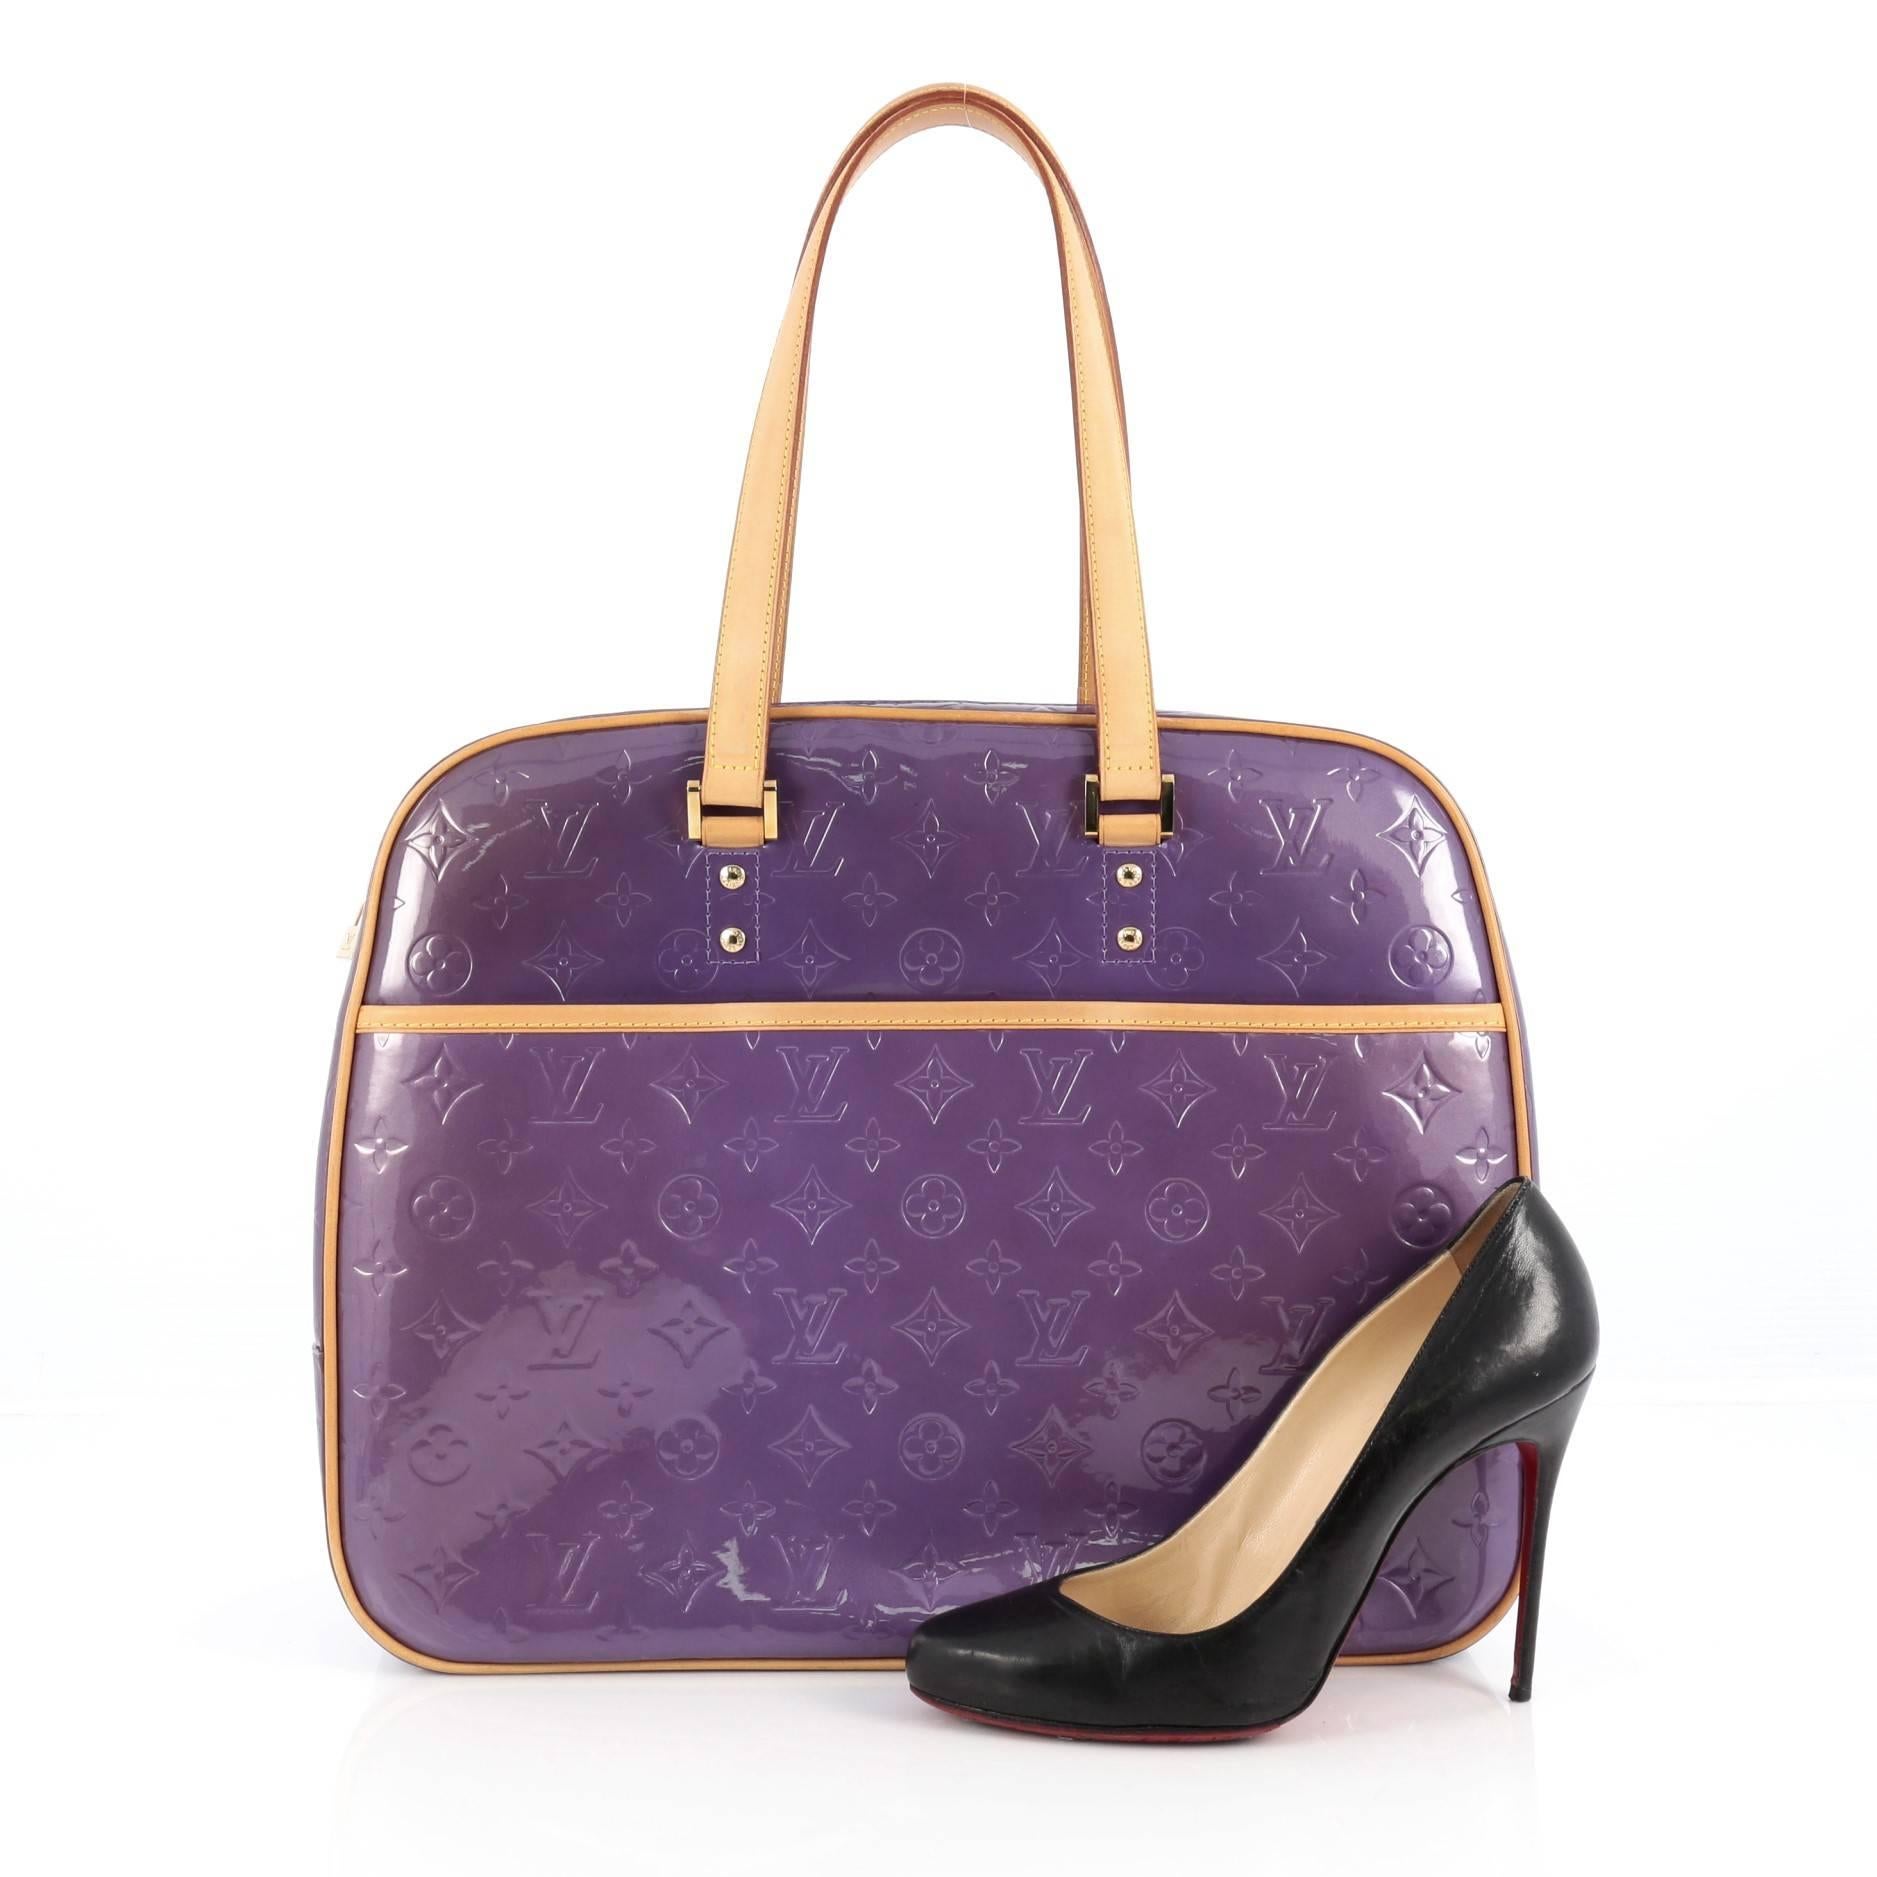 This authentic Louis Vuitton Sutton Handbag Monogram Vernis is a perfect accessory to add modern style to any outfit. Constructed from Louis Vuitton’s amethyste purple monogram vernis leather, this simple and functional bag features dual vachetta